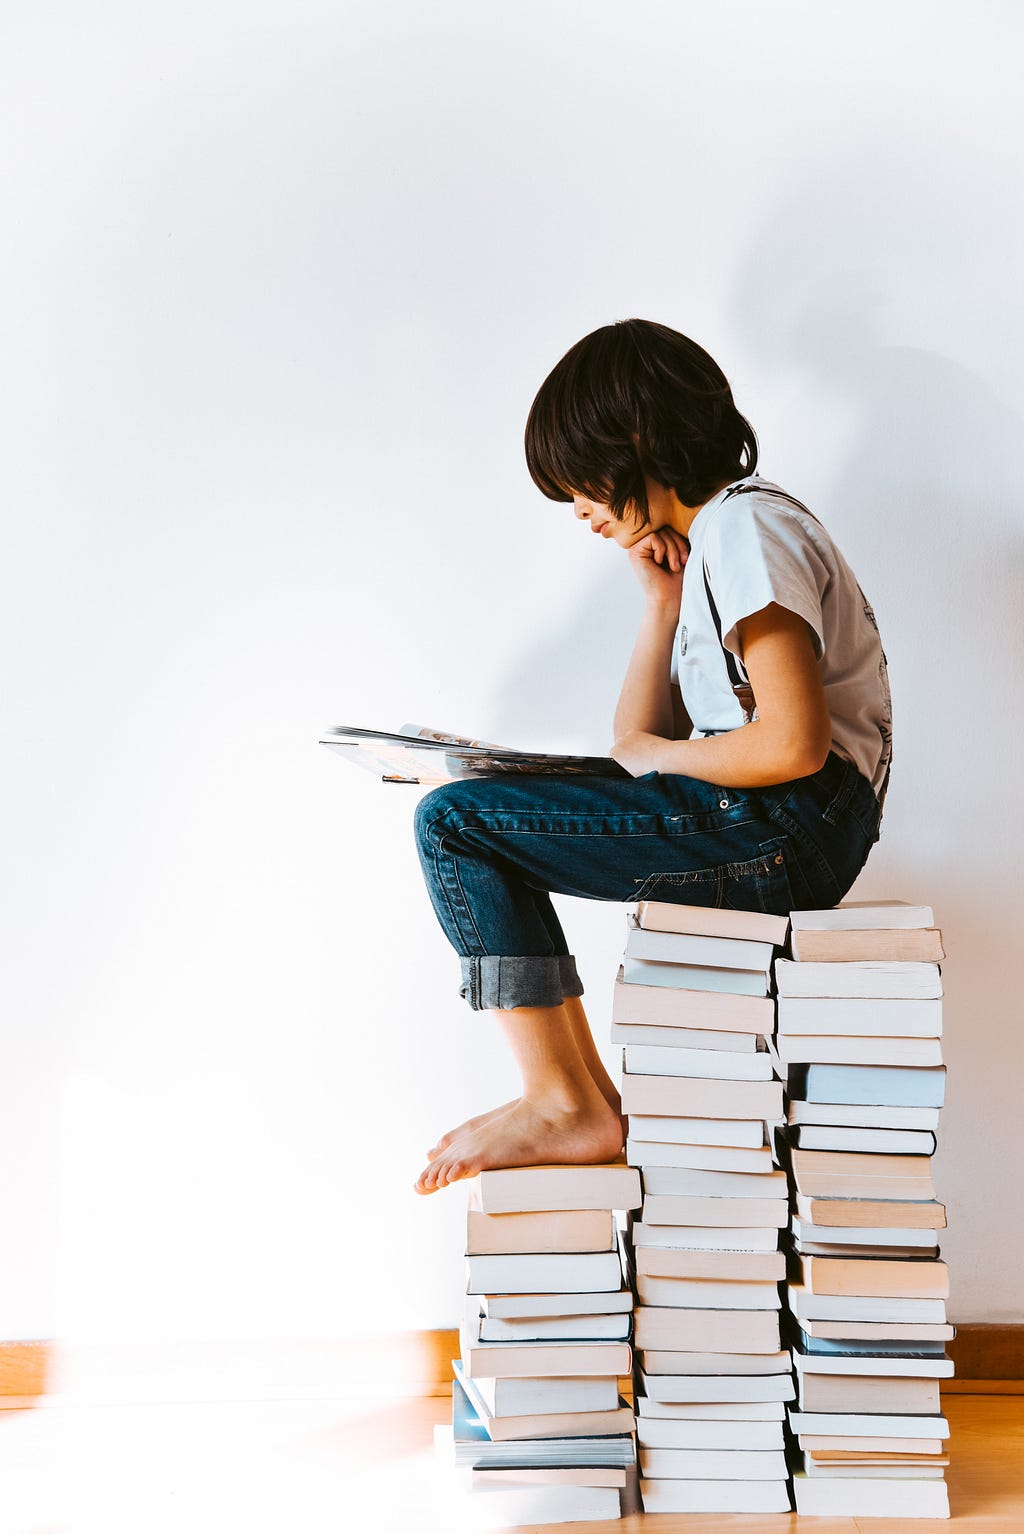 Kid sitting on a pile of books and reading